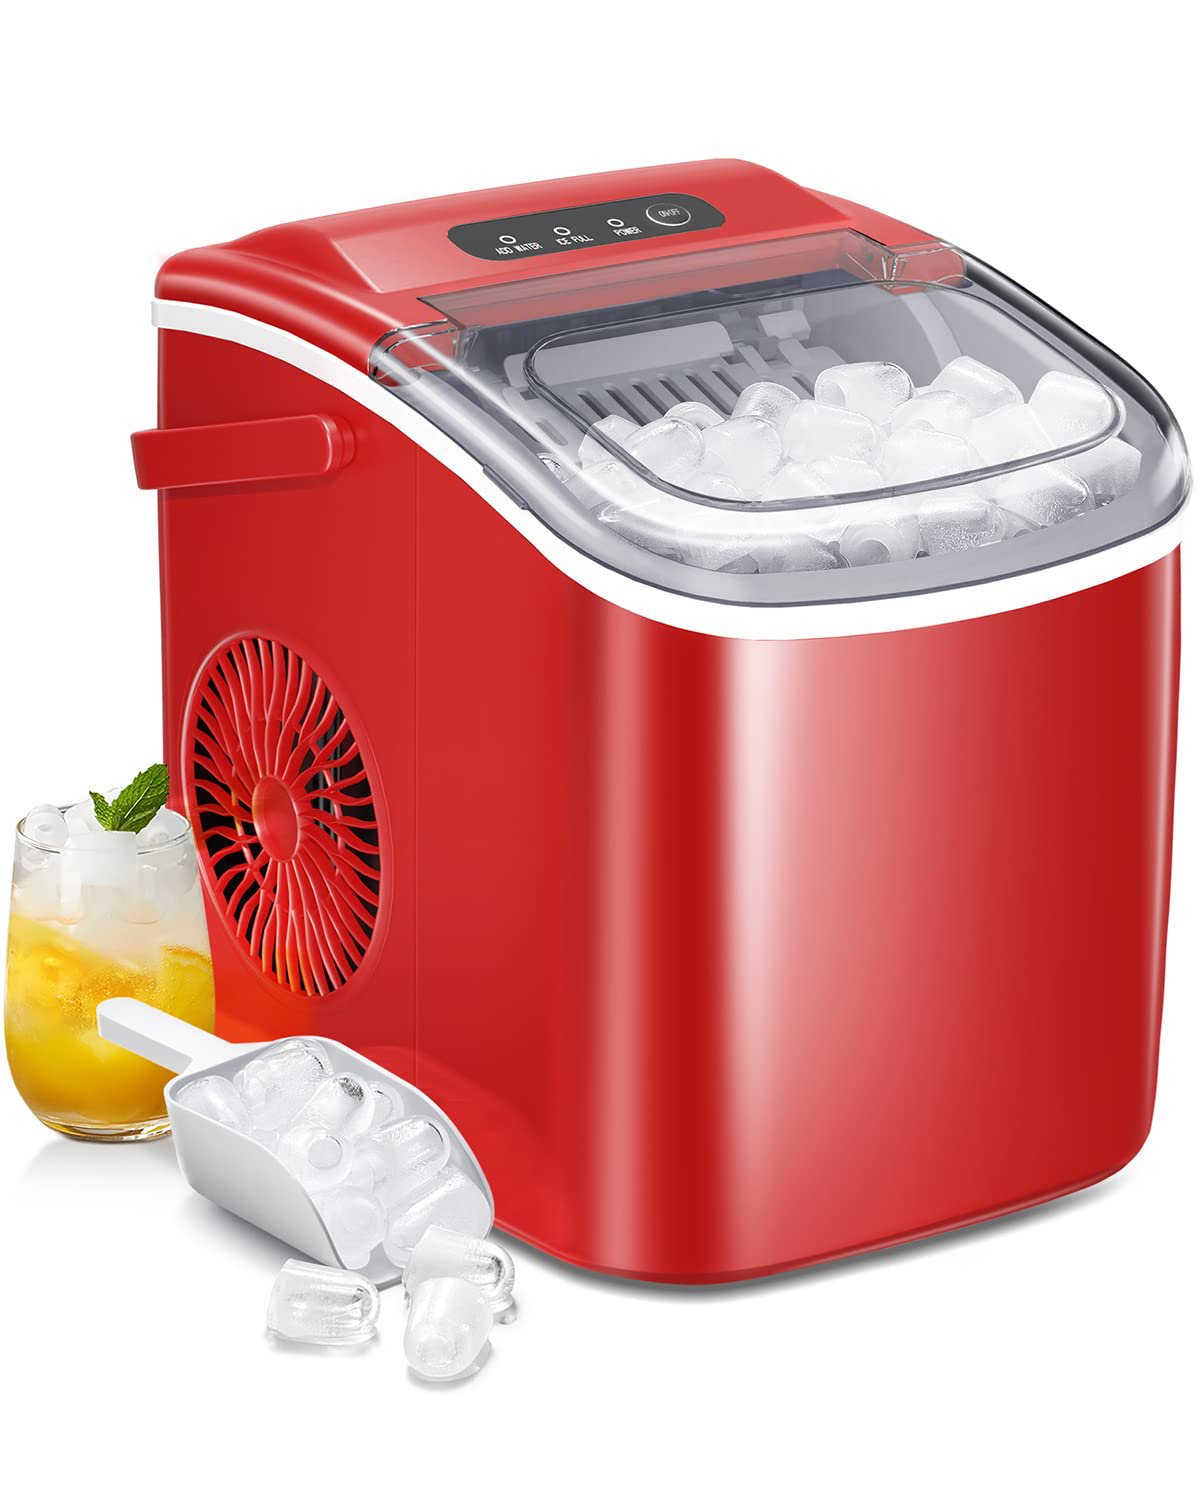 Newair Countertop Ice Maker Machine 28 lbs. of Ice in 24 Hours, Portable  Design in Red with 3 Bullet Ice Cube Sizes, Convenient Rapid Ice  Production